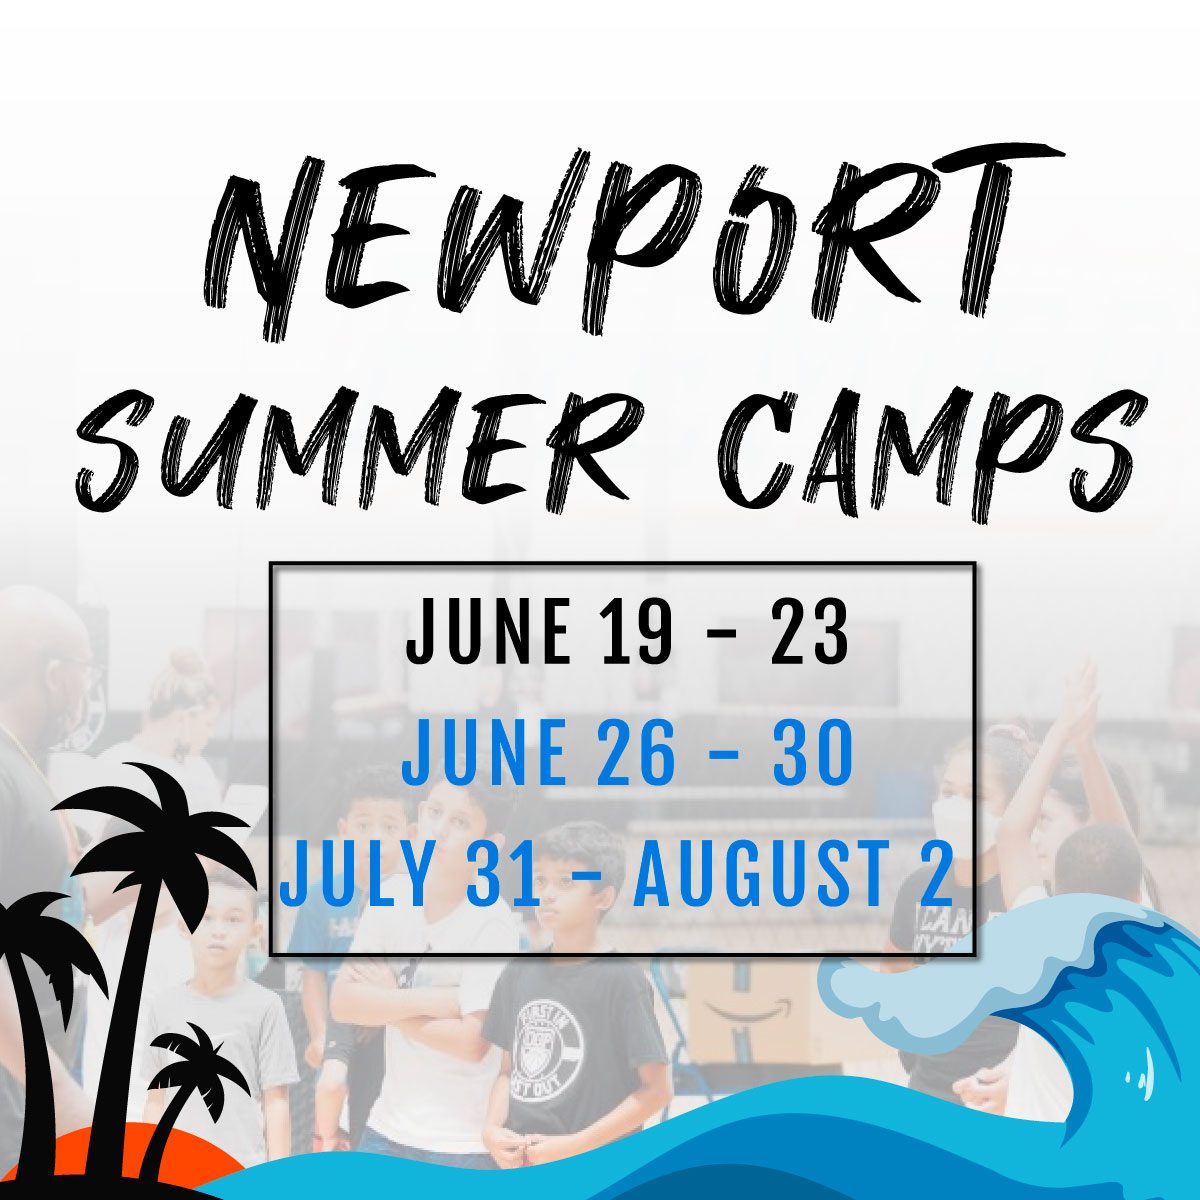 Catch the Wave in Newport this Summer!